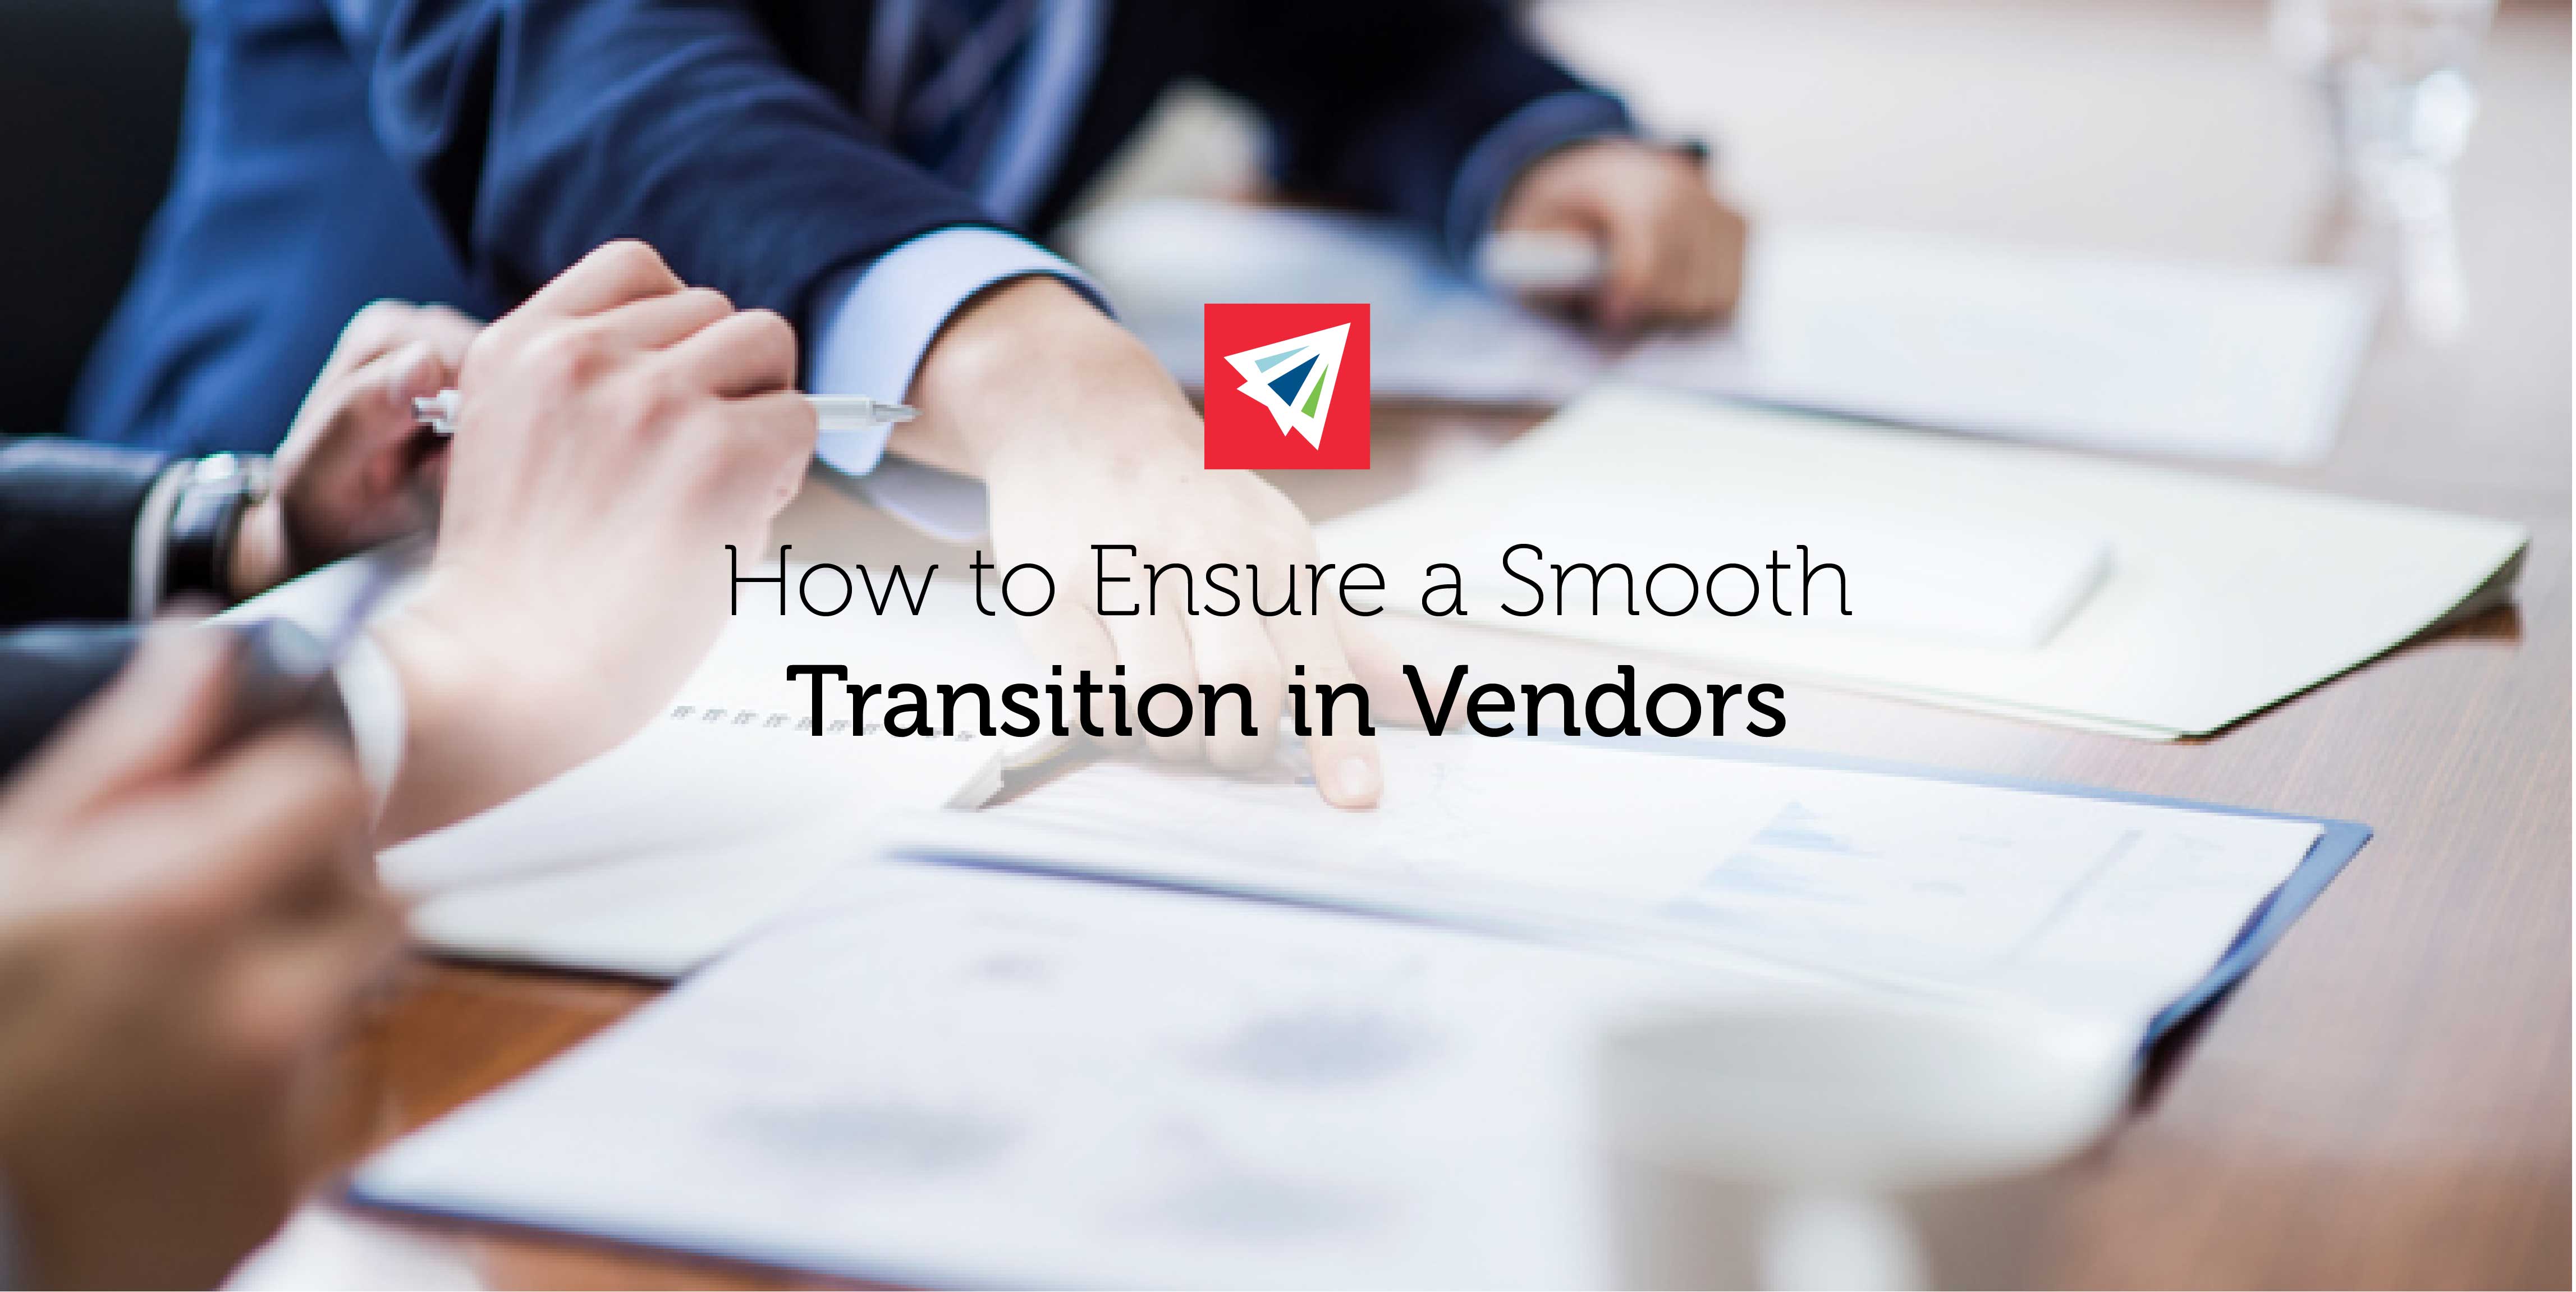 How to Change Vendors Smoothly: 2 Simple Steps